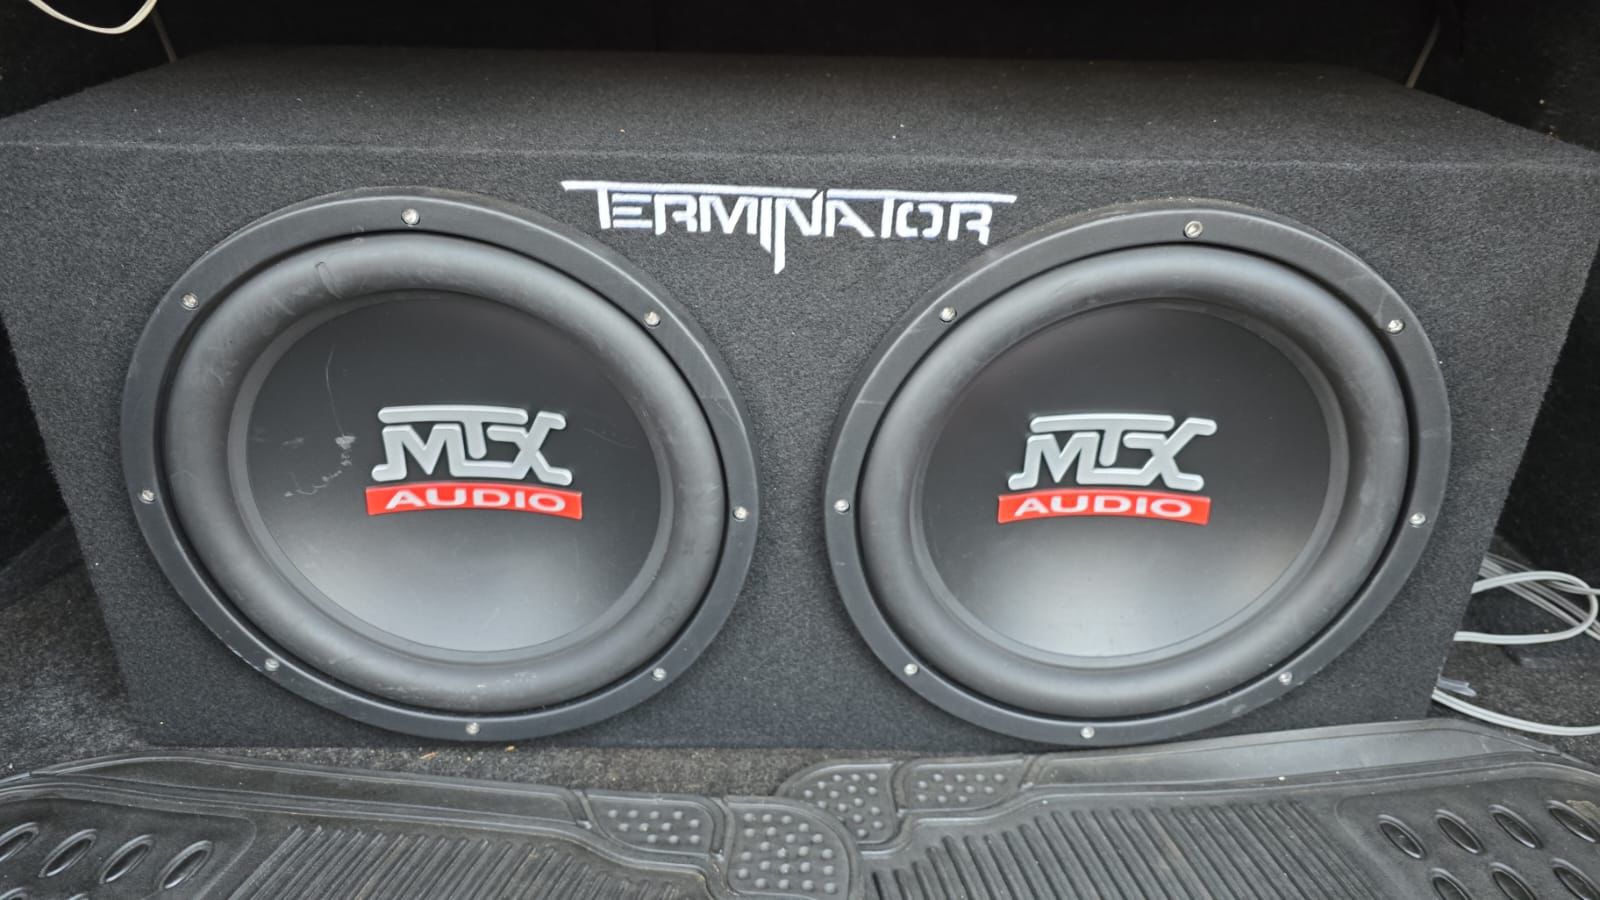 Terminator Series Ported Dual 12" Subwoofer Enclosure w/ Included Amplifier